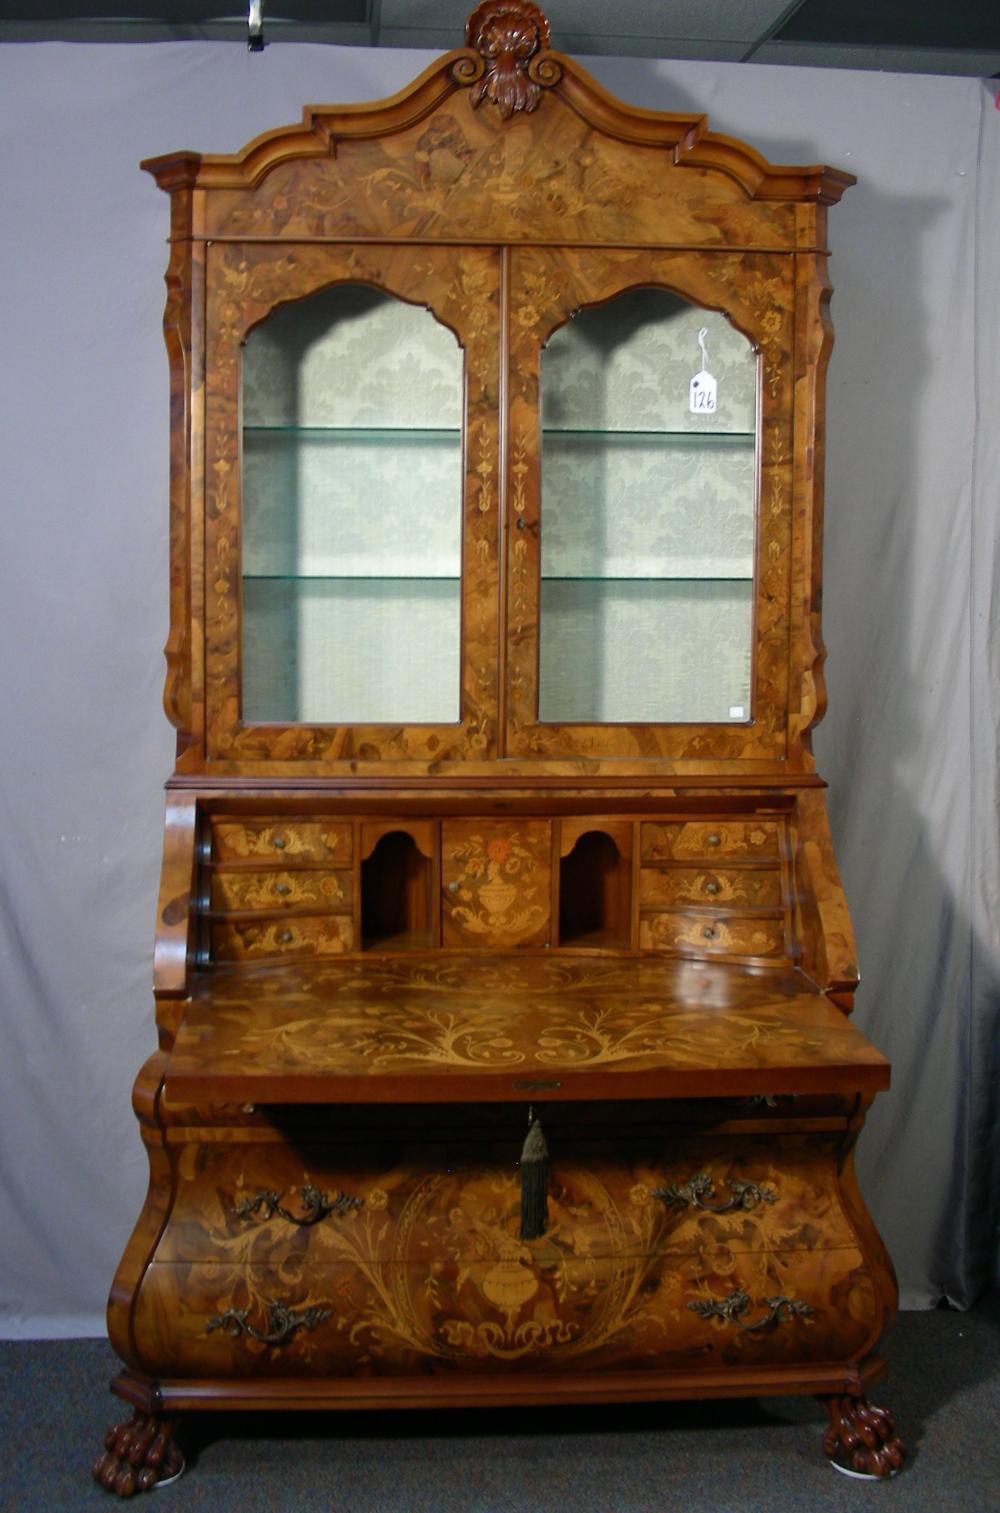 20th Century Louis XVI Style Italian Inlaid Secretary. Lower portion with four drawers. Center section with drop-front which reveals writing area and six small drawers and pigeon holes for storage. Upper display area with two doors and two glass